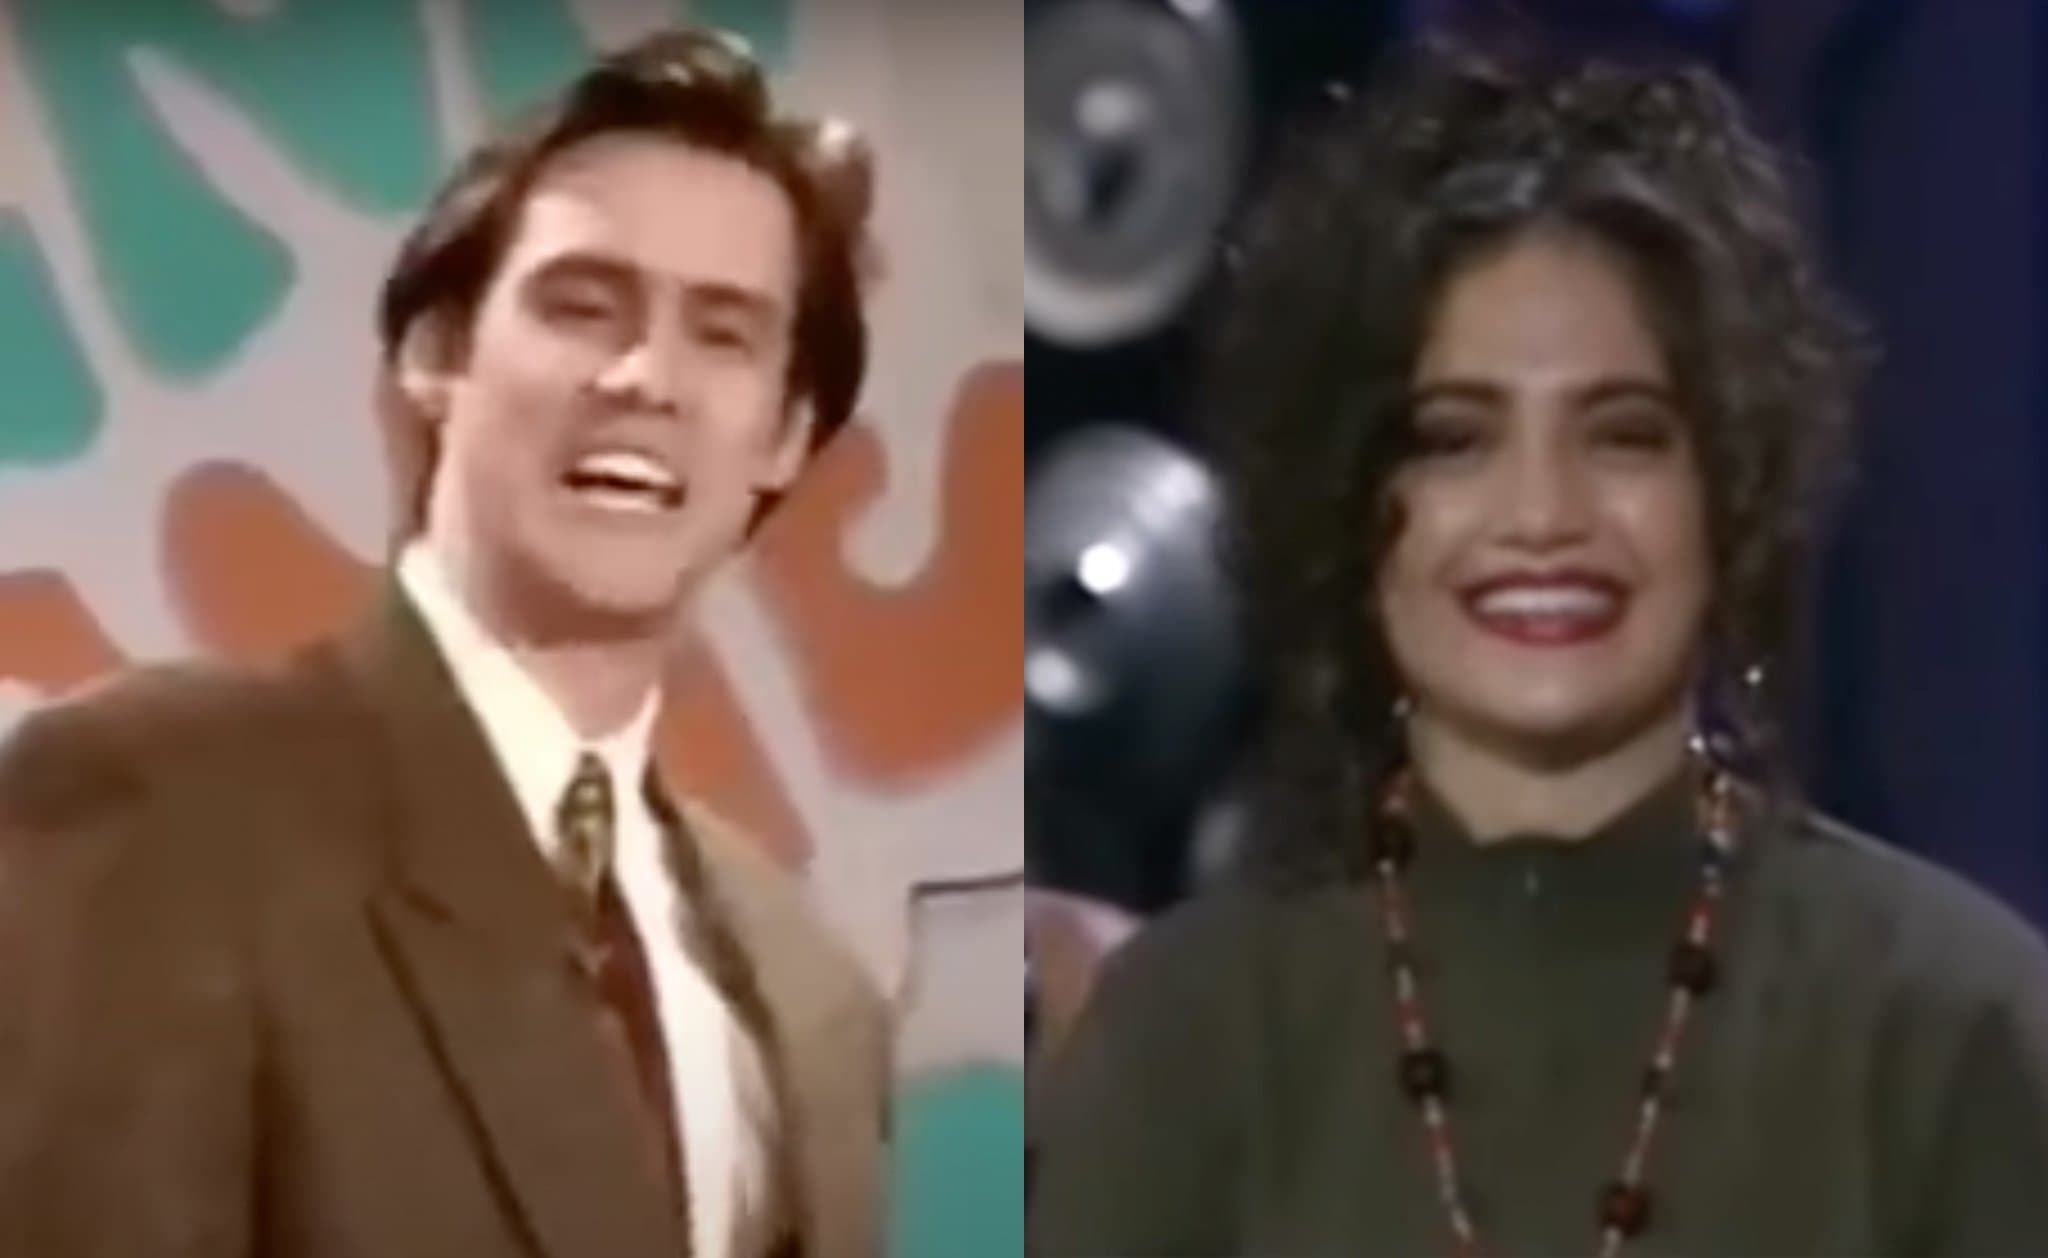 Jim Carrey and Jennifer Lopez began their career in the sketch comedy In Living Color in the early 1990s